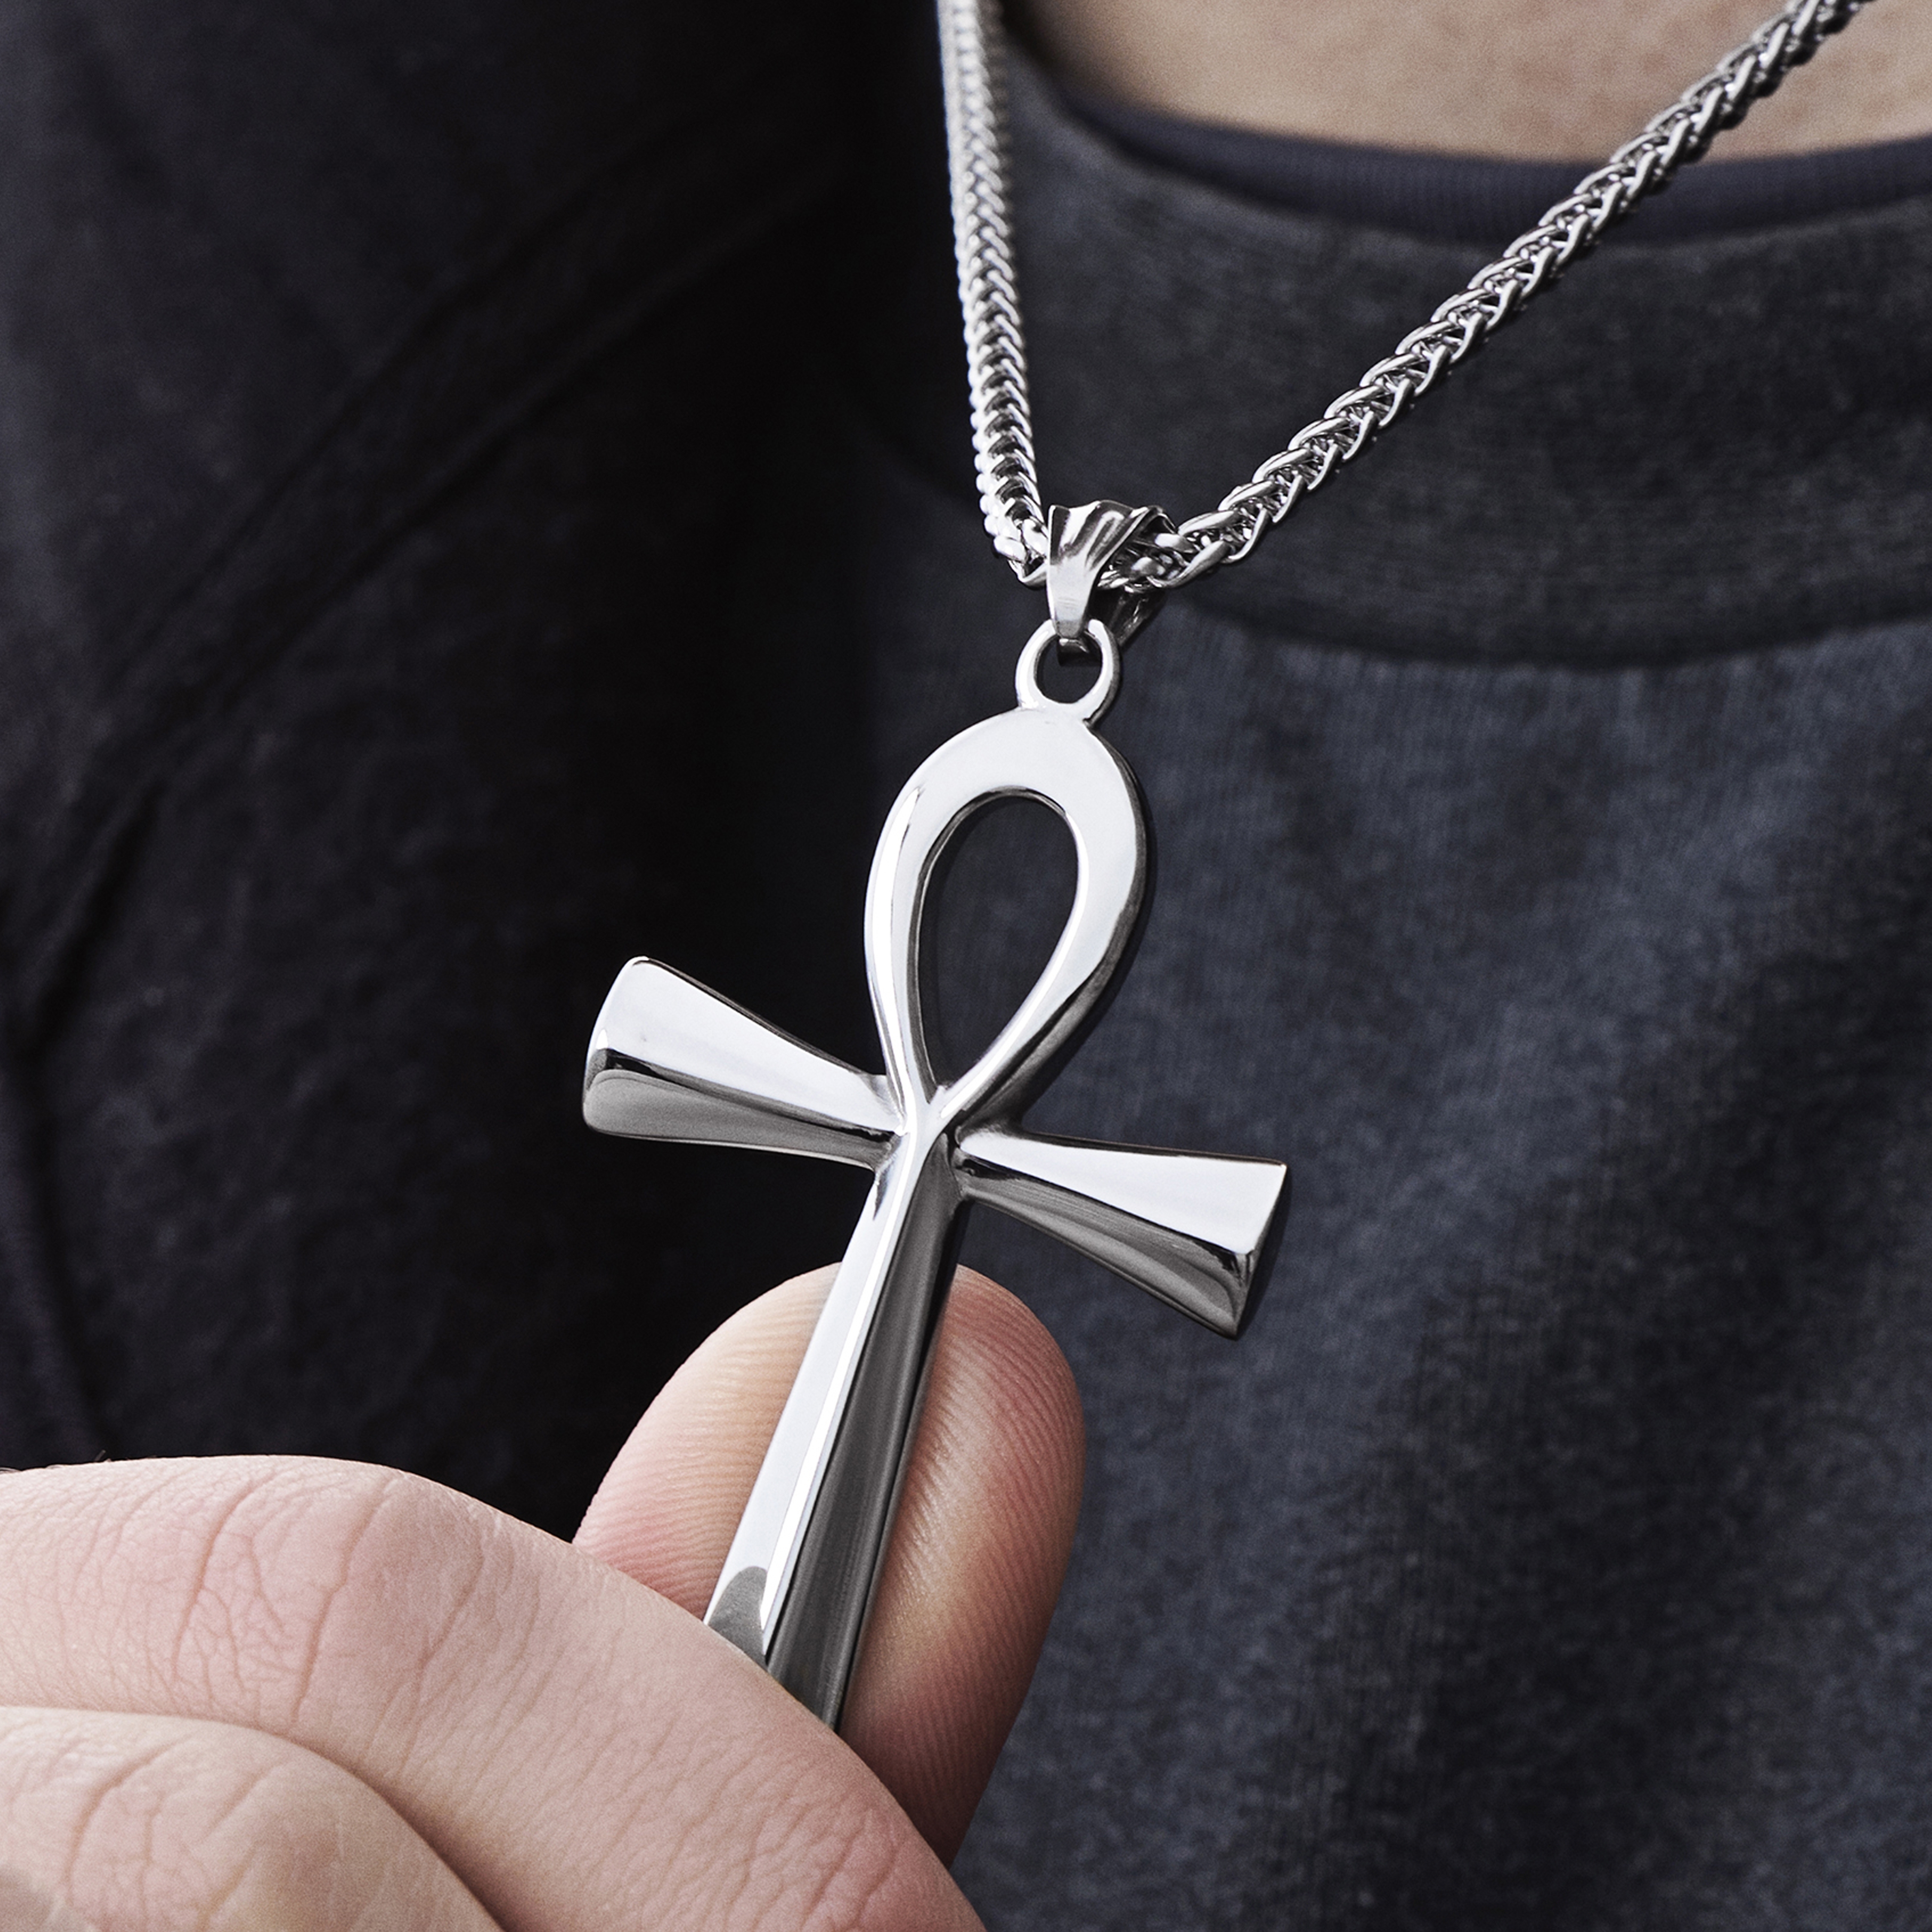 African Continent Egyptian Ankh Pendant / Necklace in Sterling Silver -  Factory Direct Jewelry